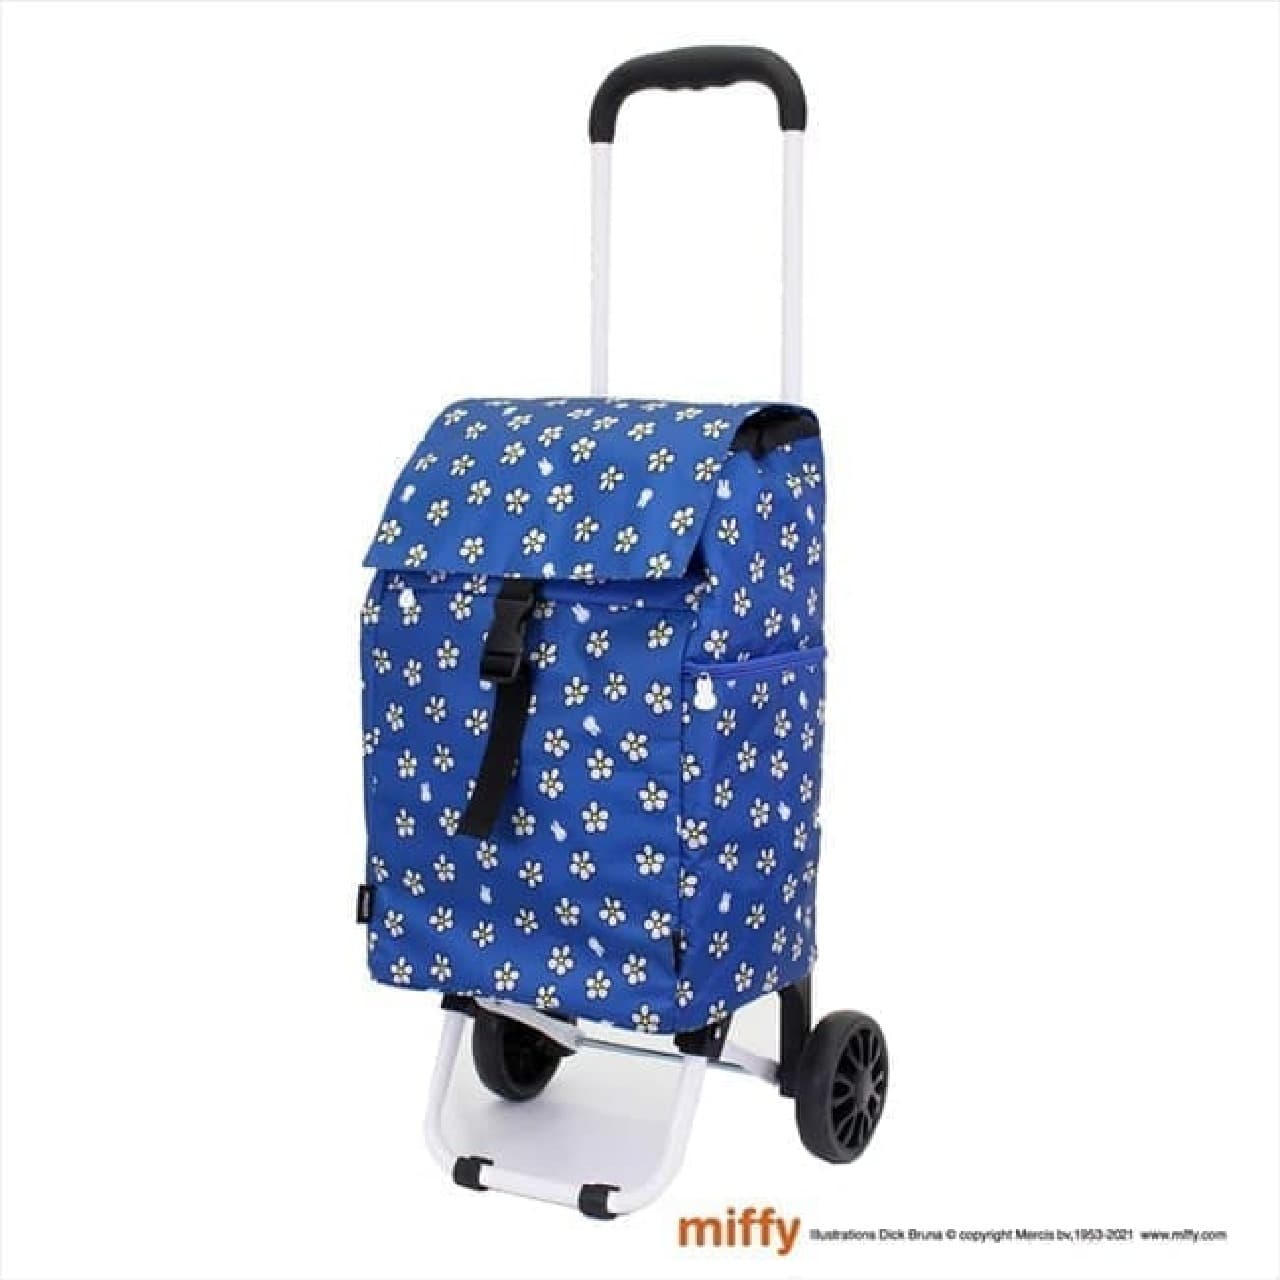 [Miffy] Cold storage shopping cart